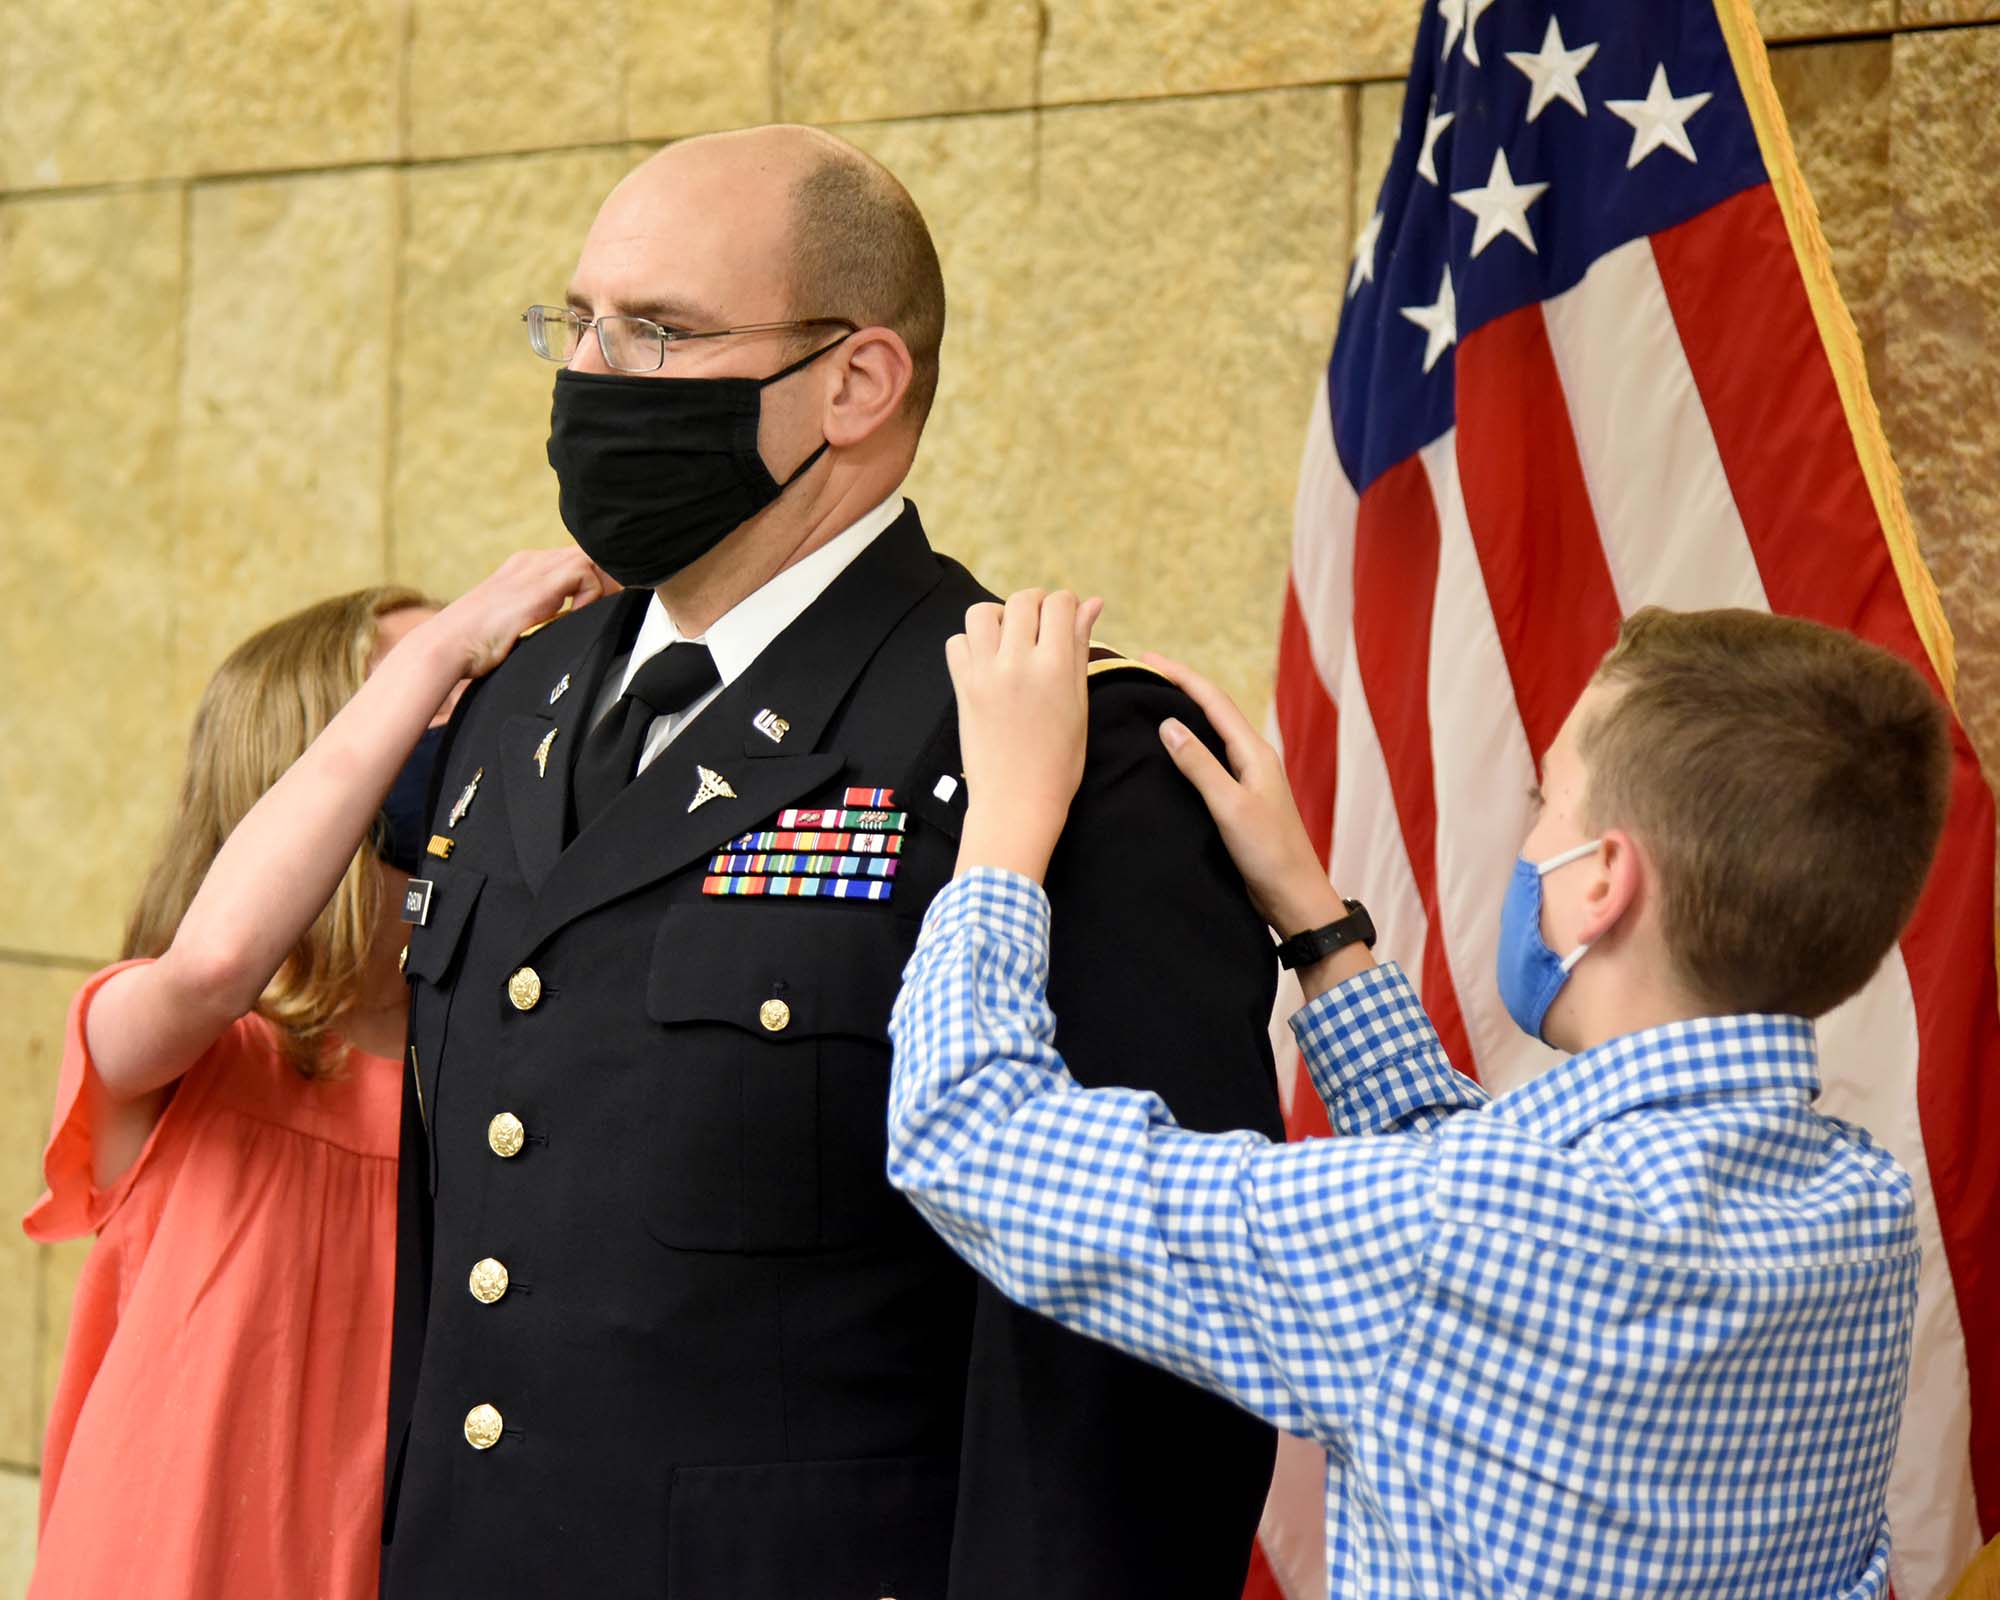 Daniel Raboin being promoted to lieutenant colonel, U.S. Army